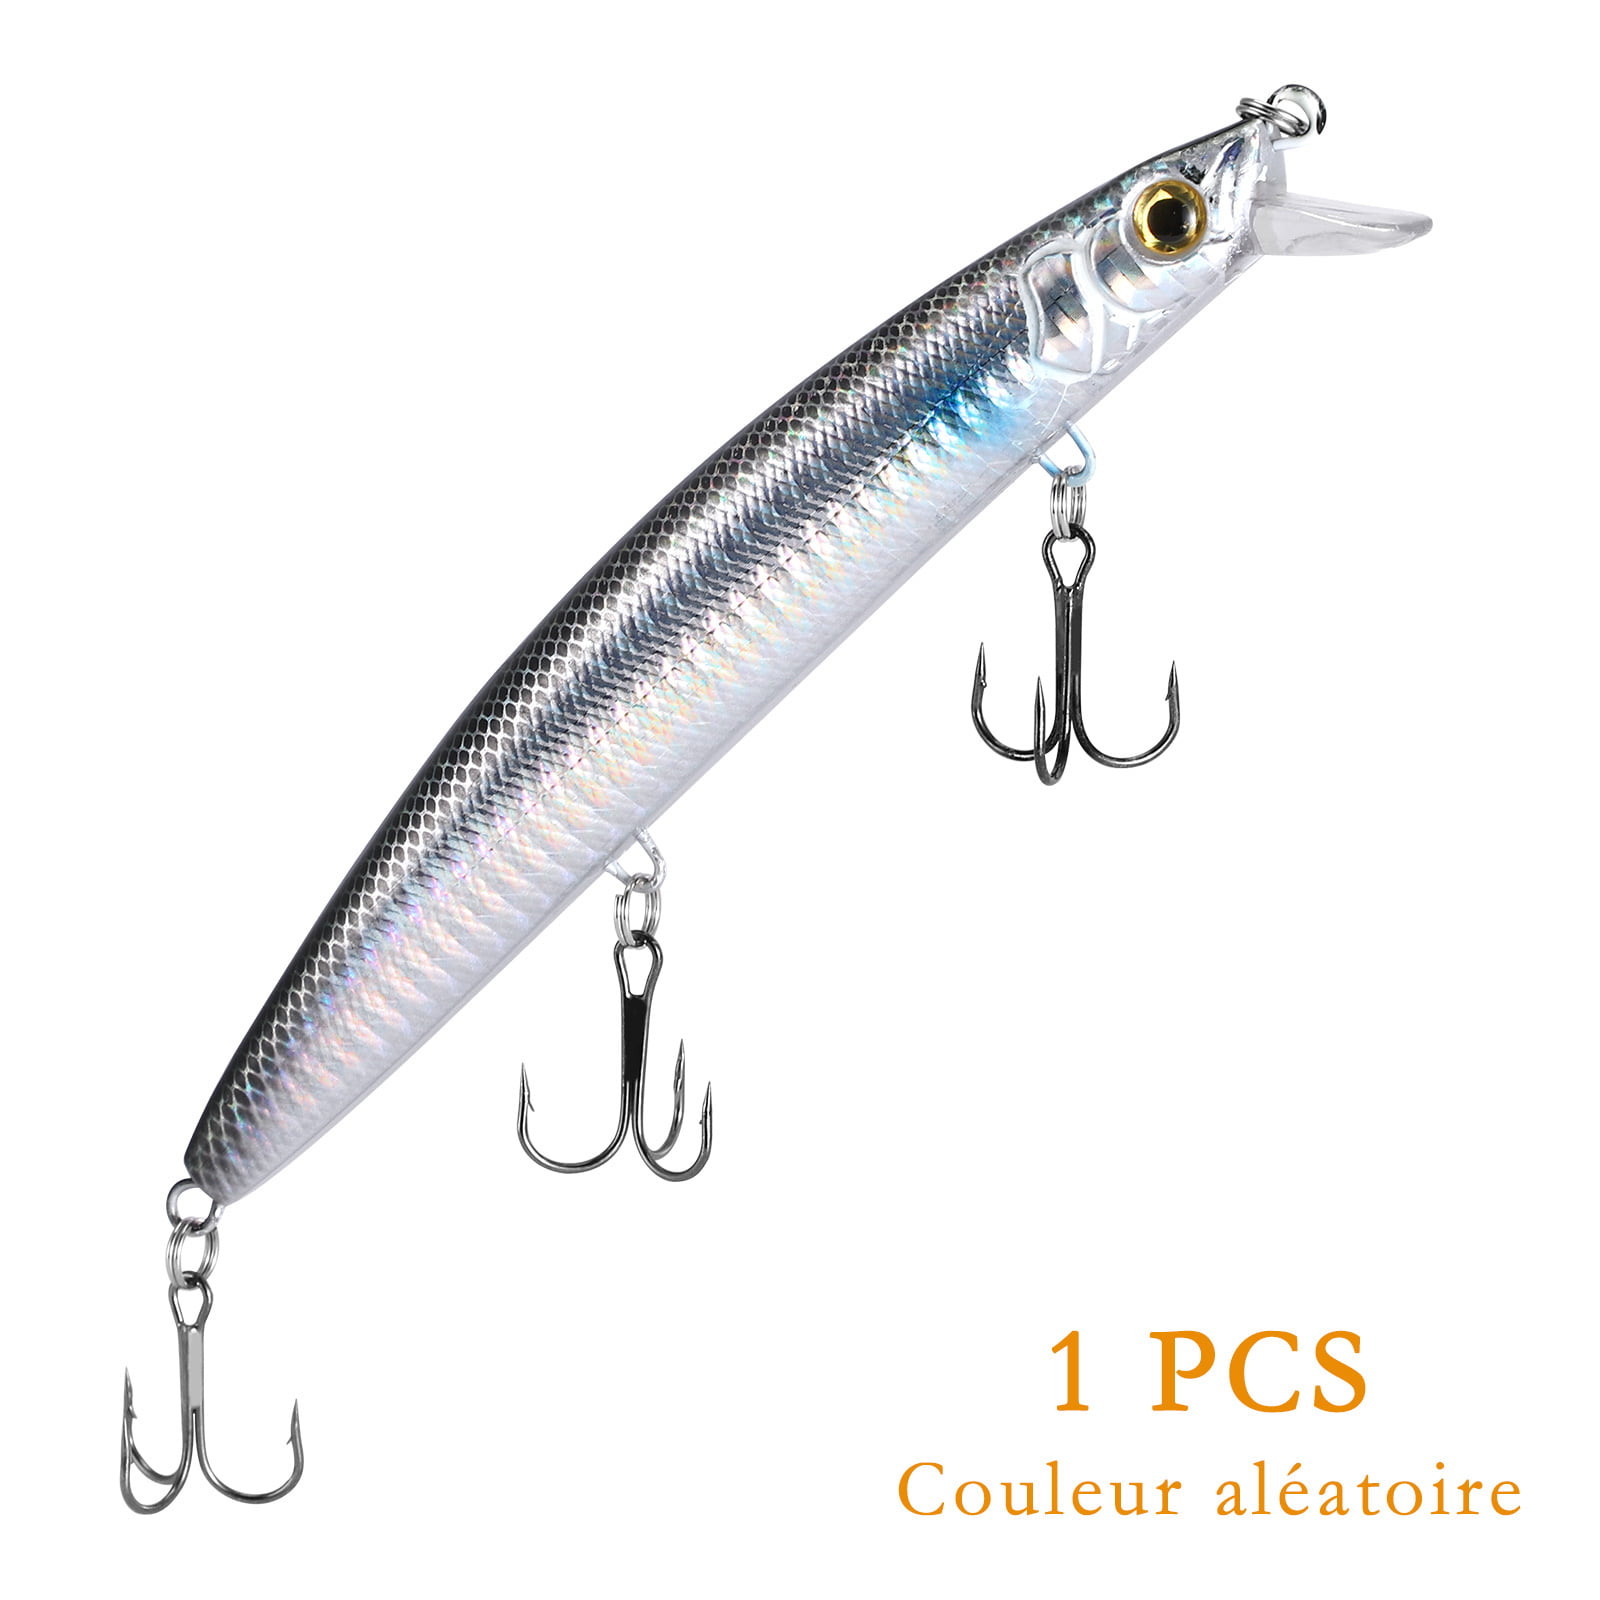 N\A 6PCS Metal Fishing Lures Slice Spoon Silver Fishing Spoons Lure Baits with Treble Hook Lure Kit Spinner Baits Tackle Mackeral Lures Mini Fishing Spinners Kit